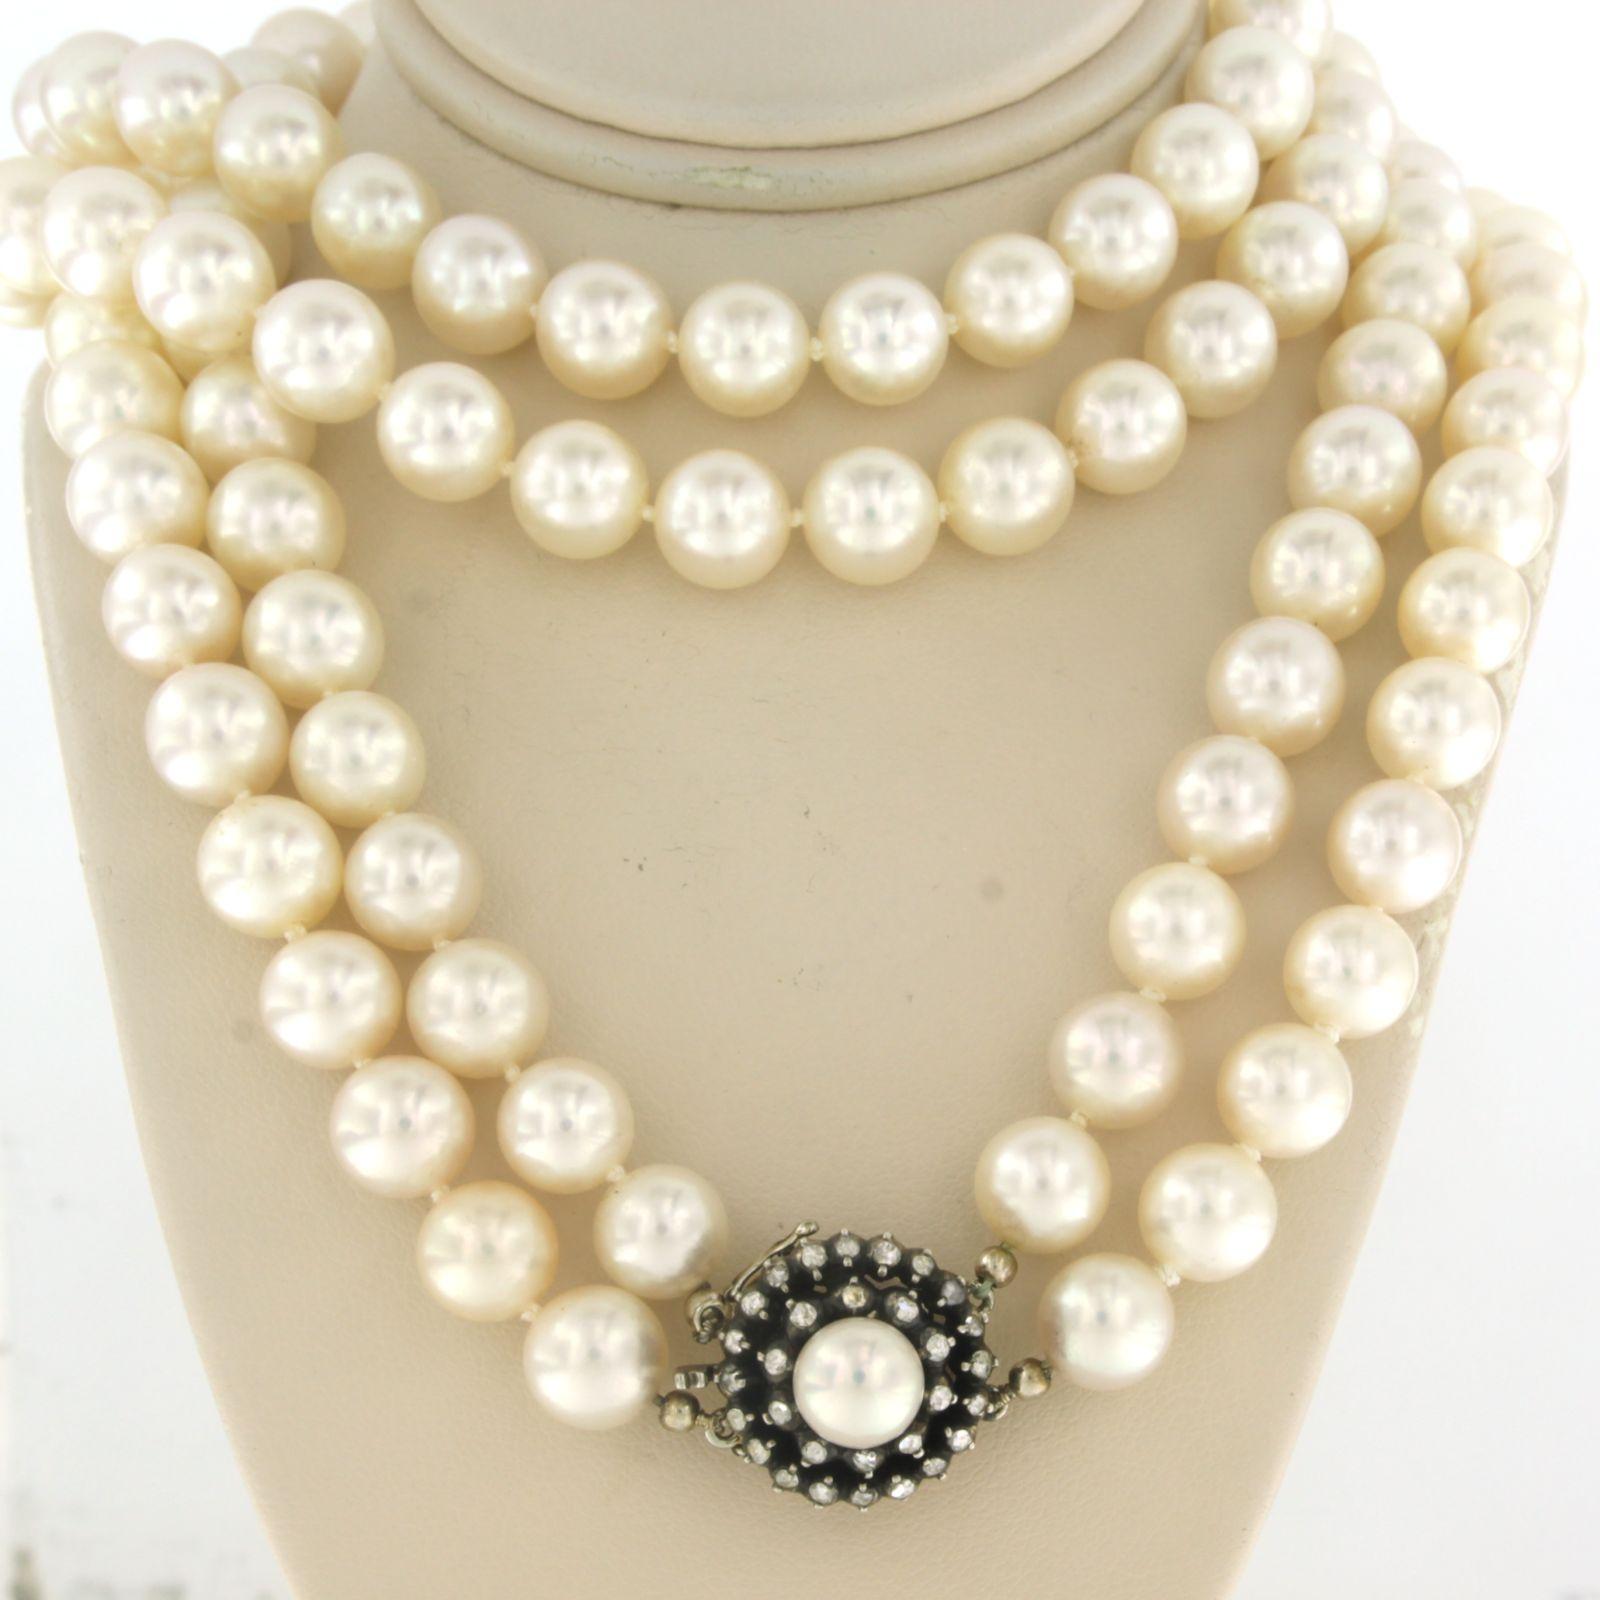 14k gold with silver clasp set with a central pearl and an entourage of rose diamonds. 0.40ct on a double row pearl necklace

Detailed description

the pearl necklace is approximately 60 cm long and 1.6 cm wide

The size of the lock is 1.6 cm high